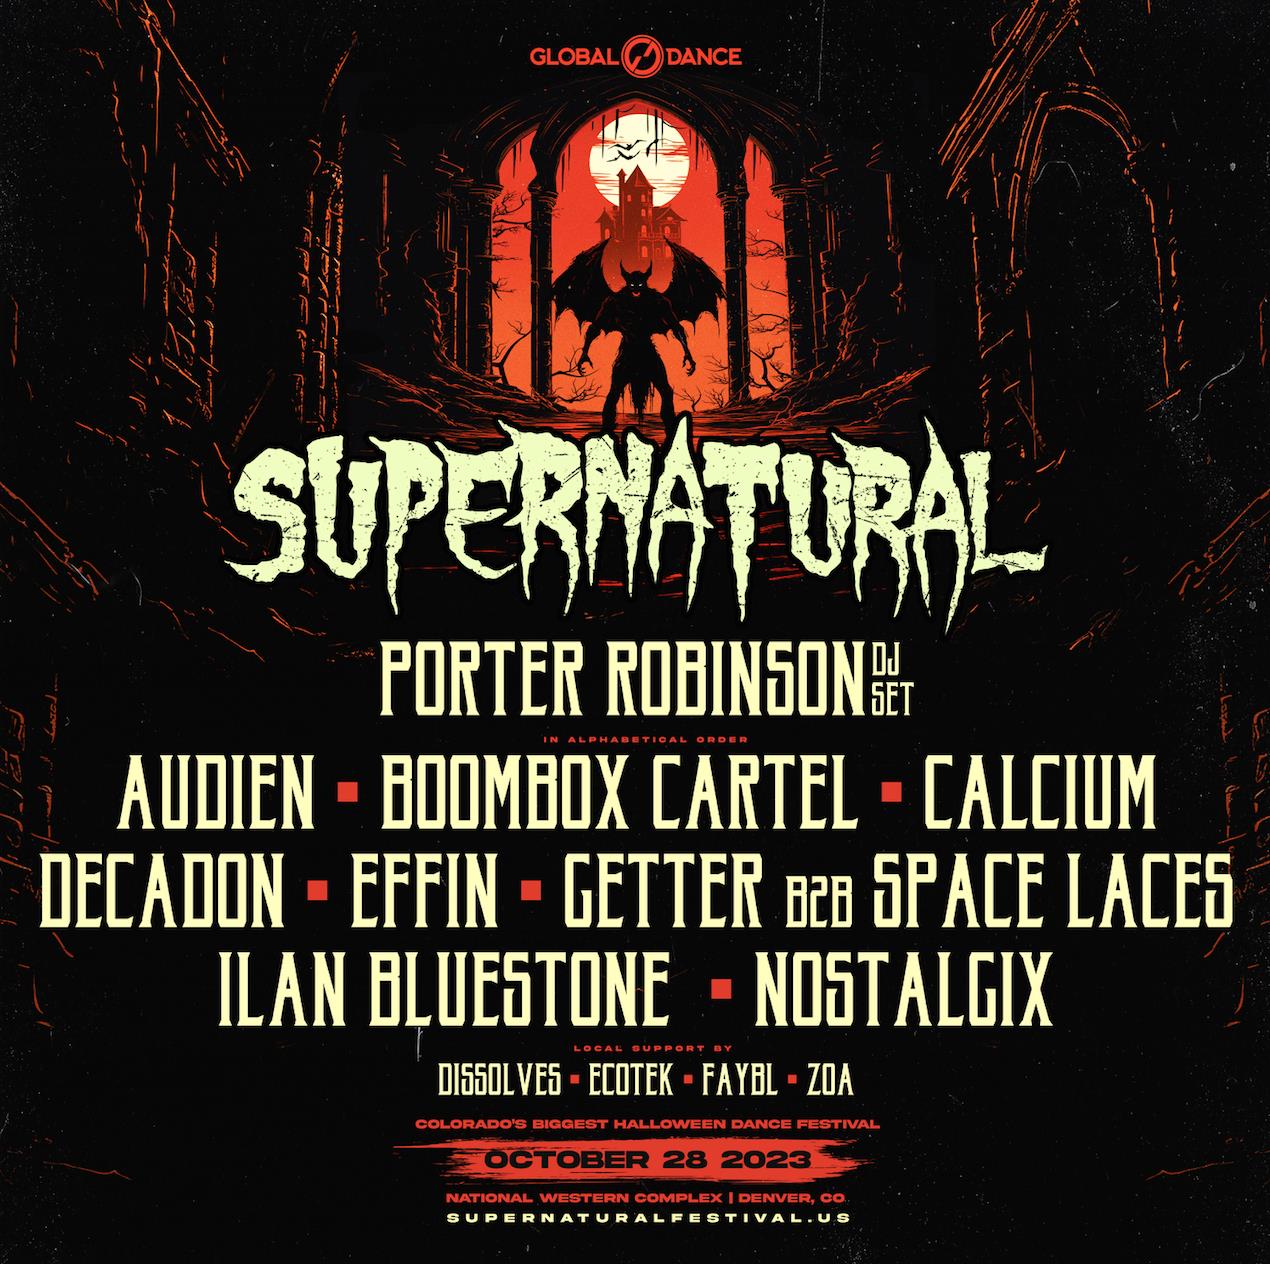 Buy Tickets to Supernatural in Denver on Oct 28, 2023